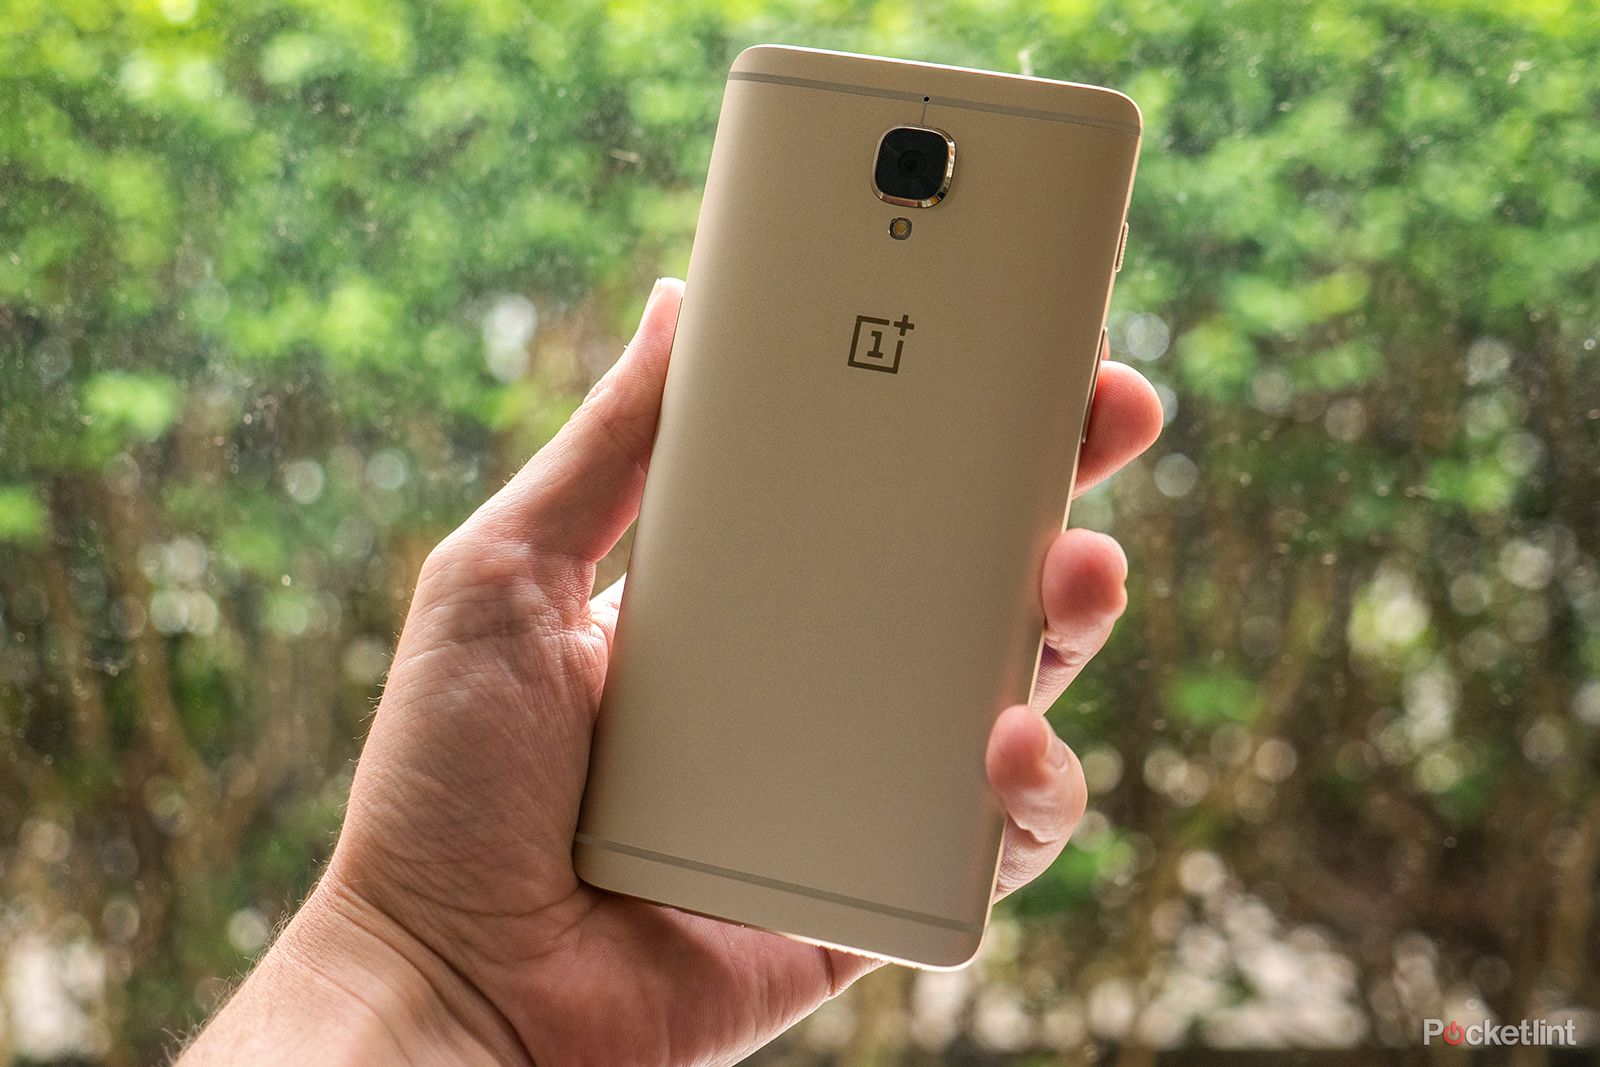 oneplus 3 soft gold in pictures if bling is your thing image 1